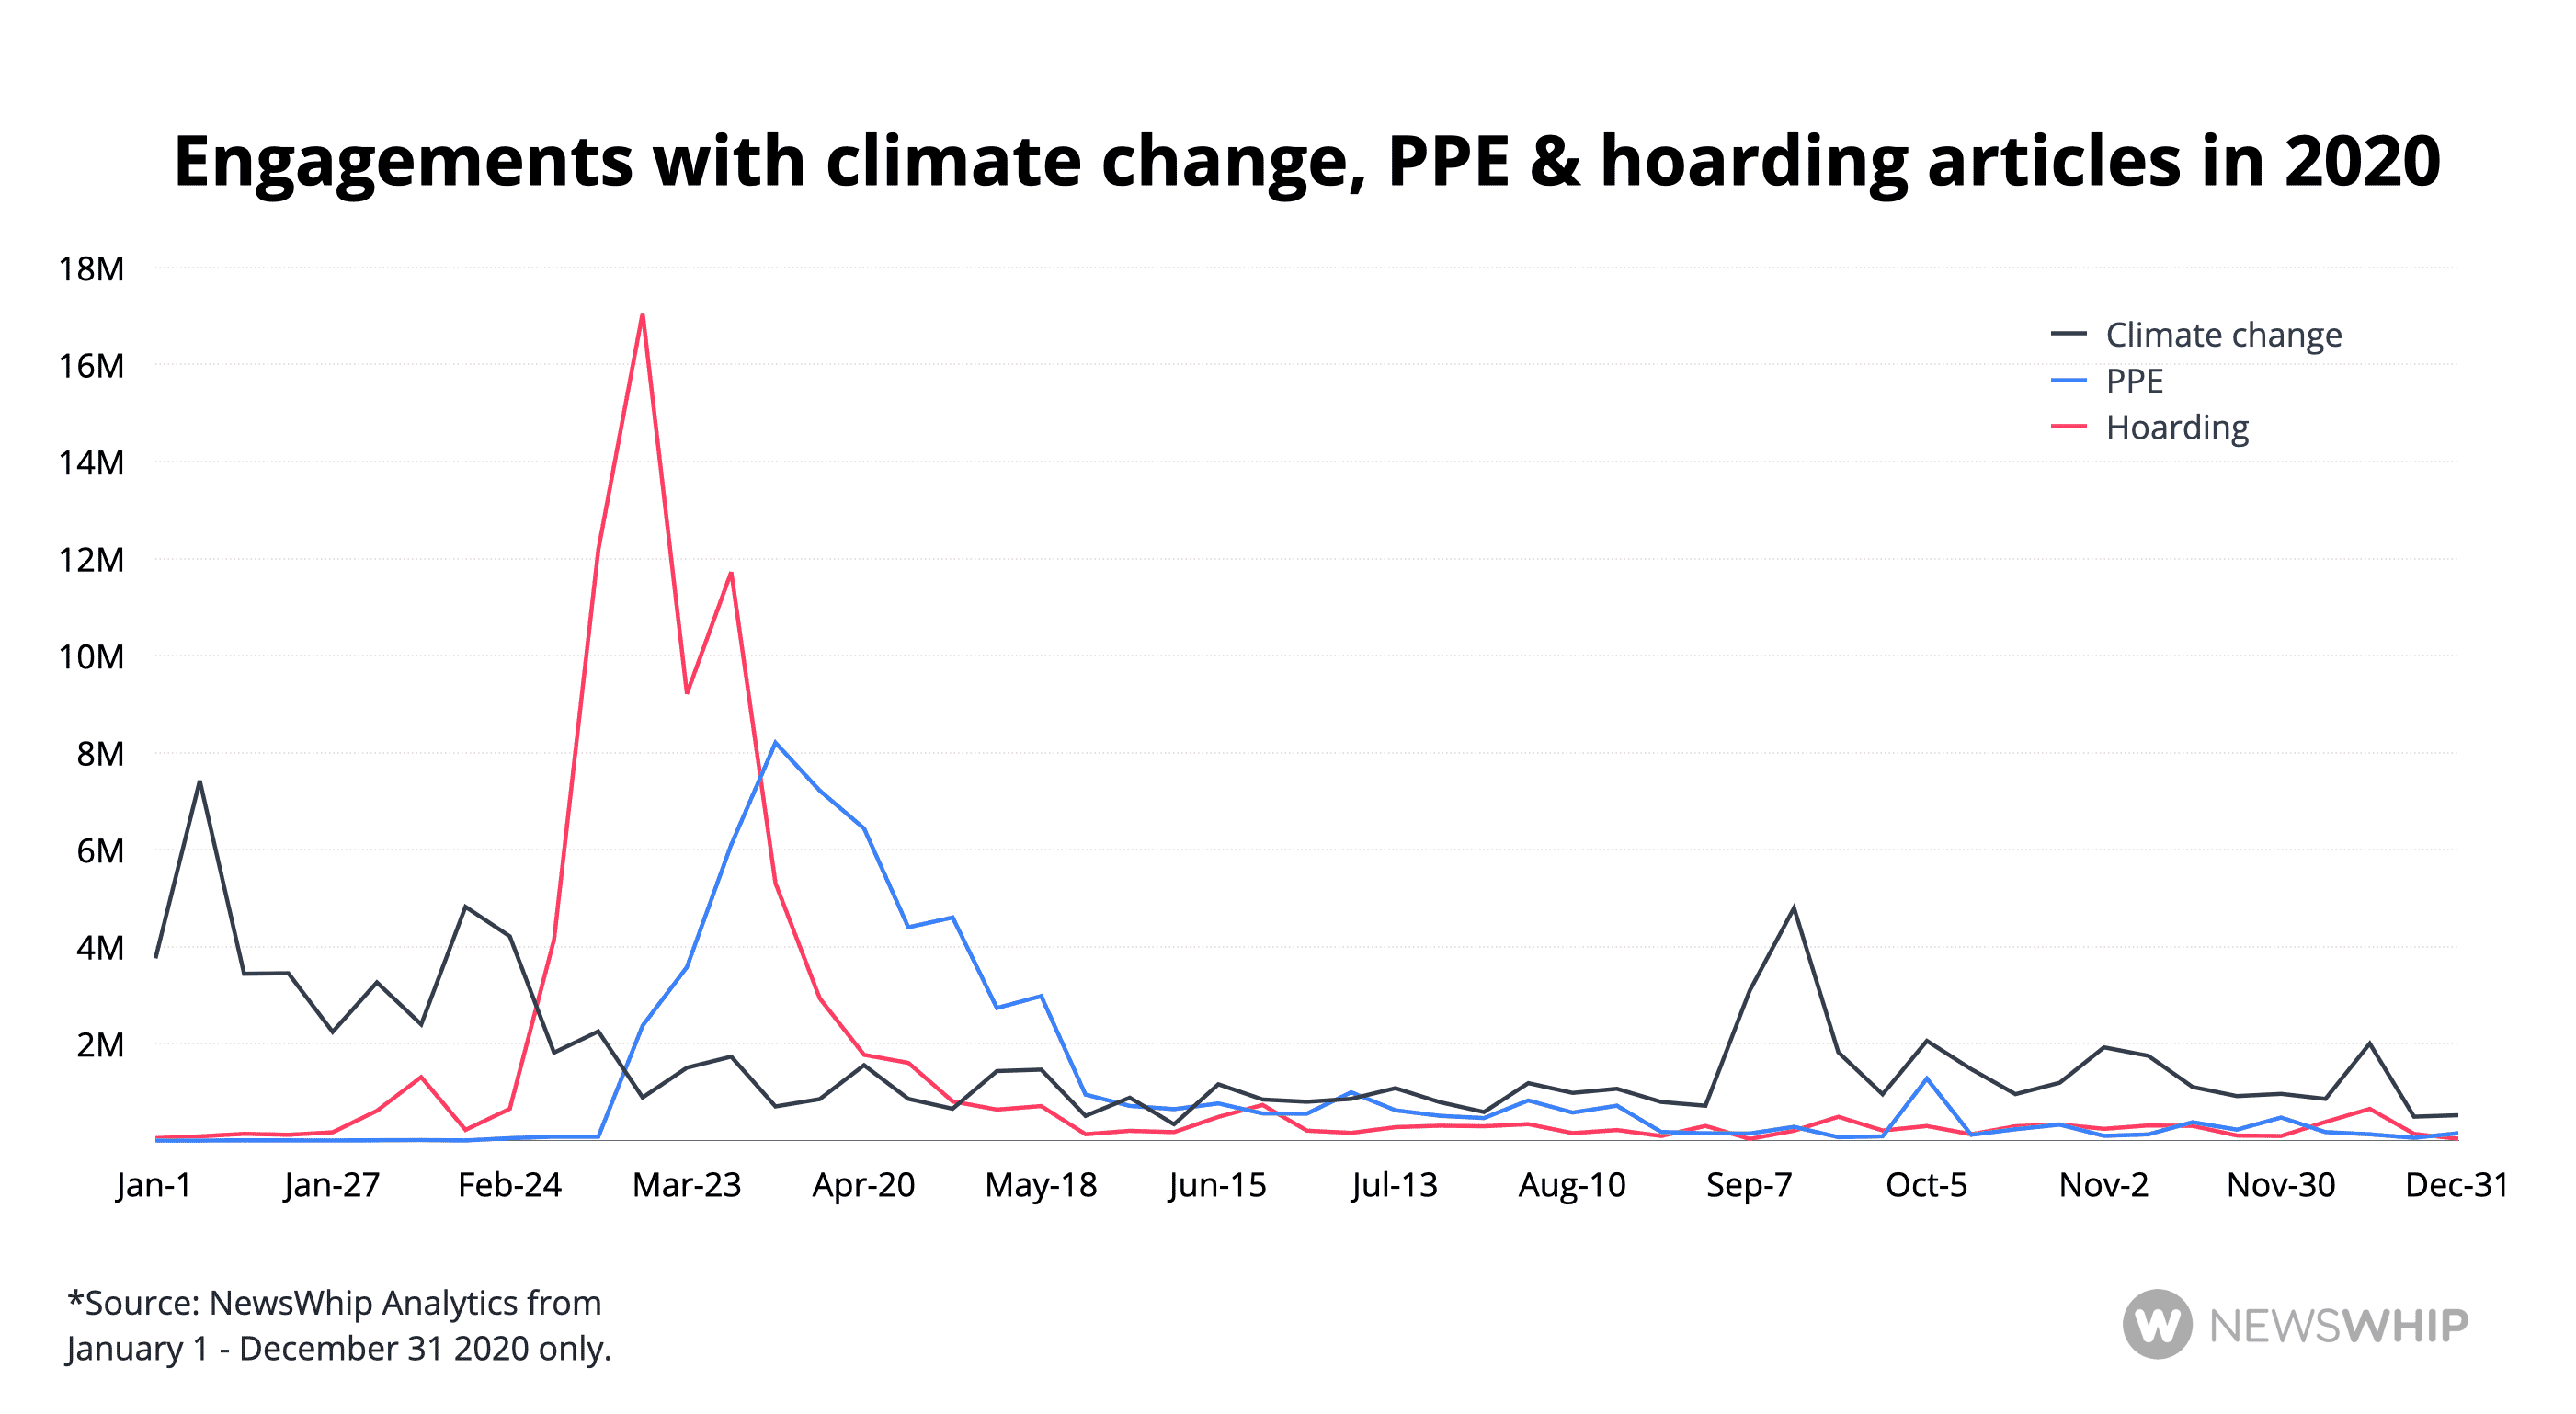 Chart showing engagement to ppe and climate change in 2020